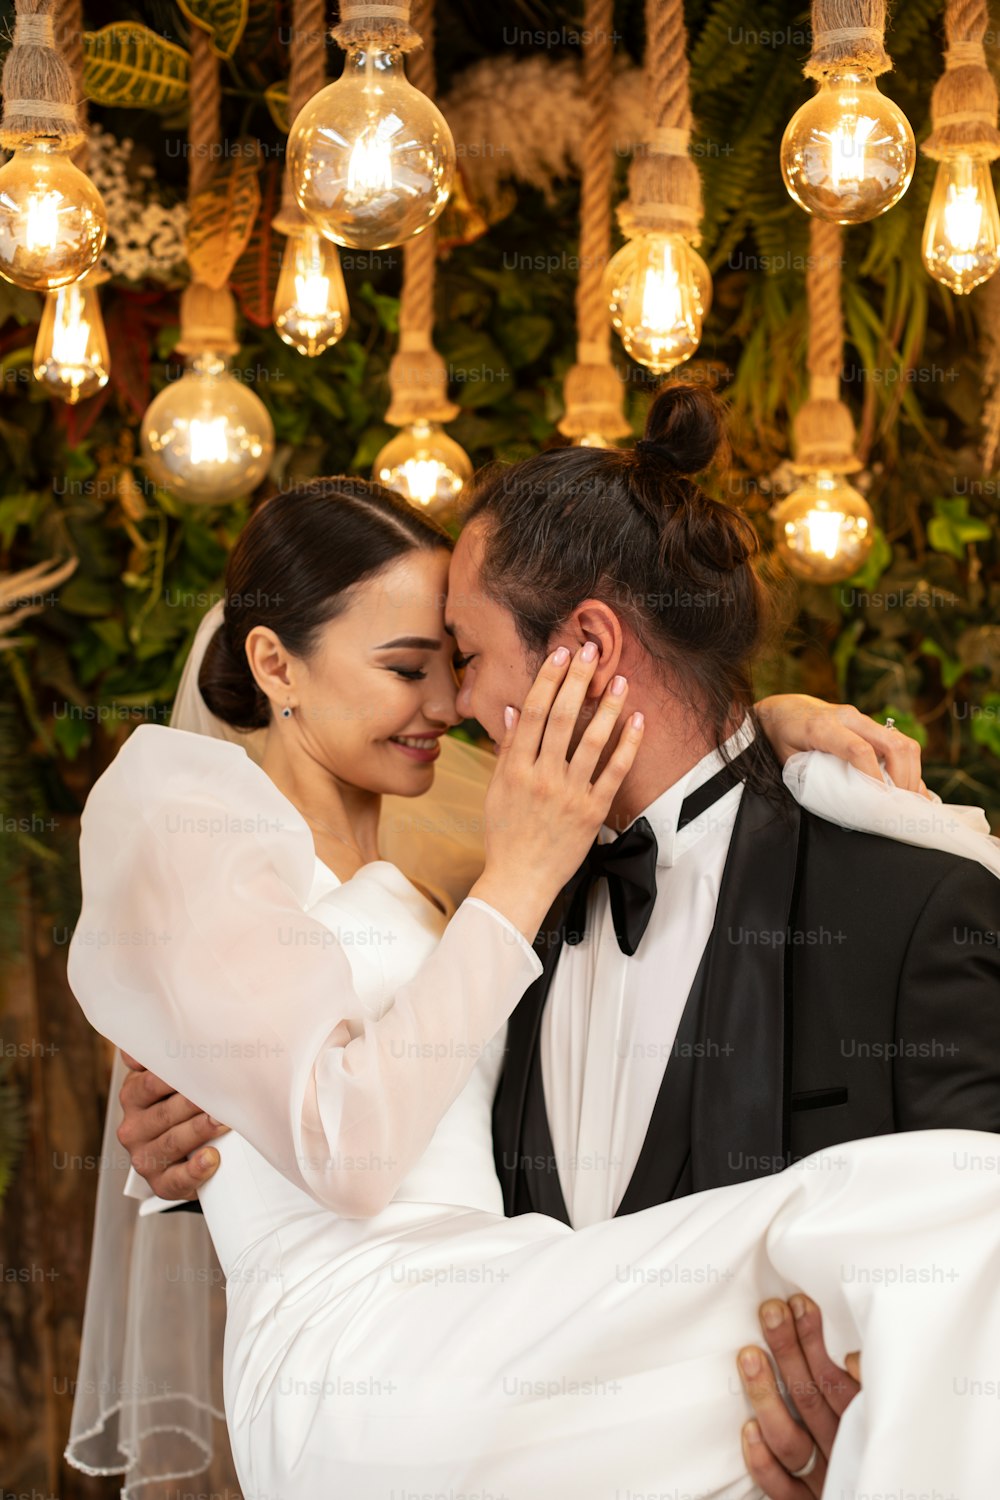 a bride and groom embracing each other under a chandelier